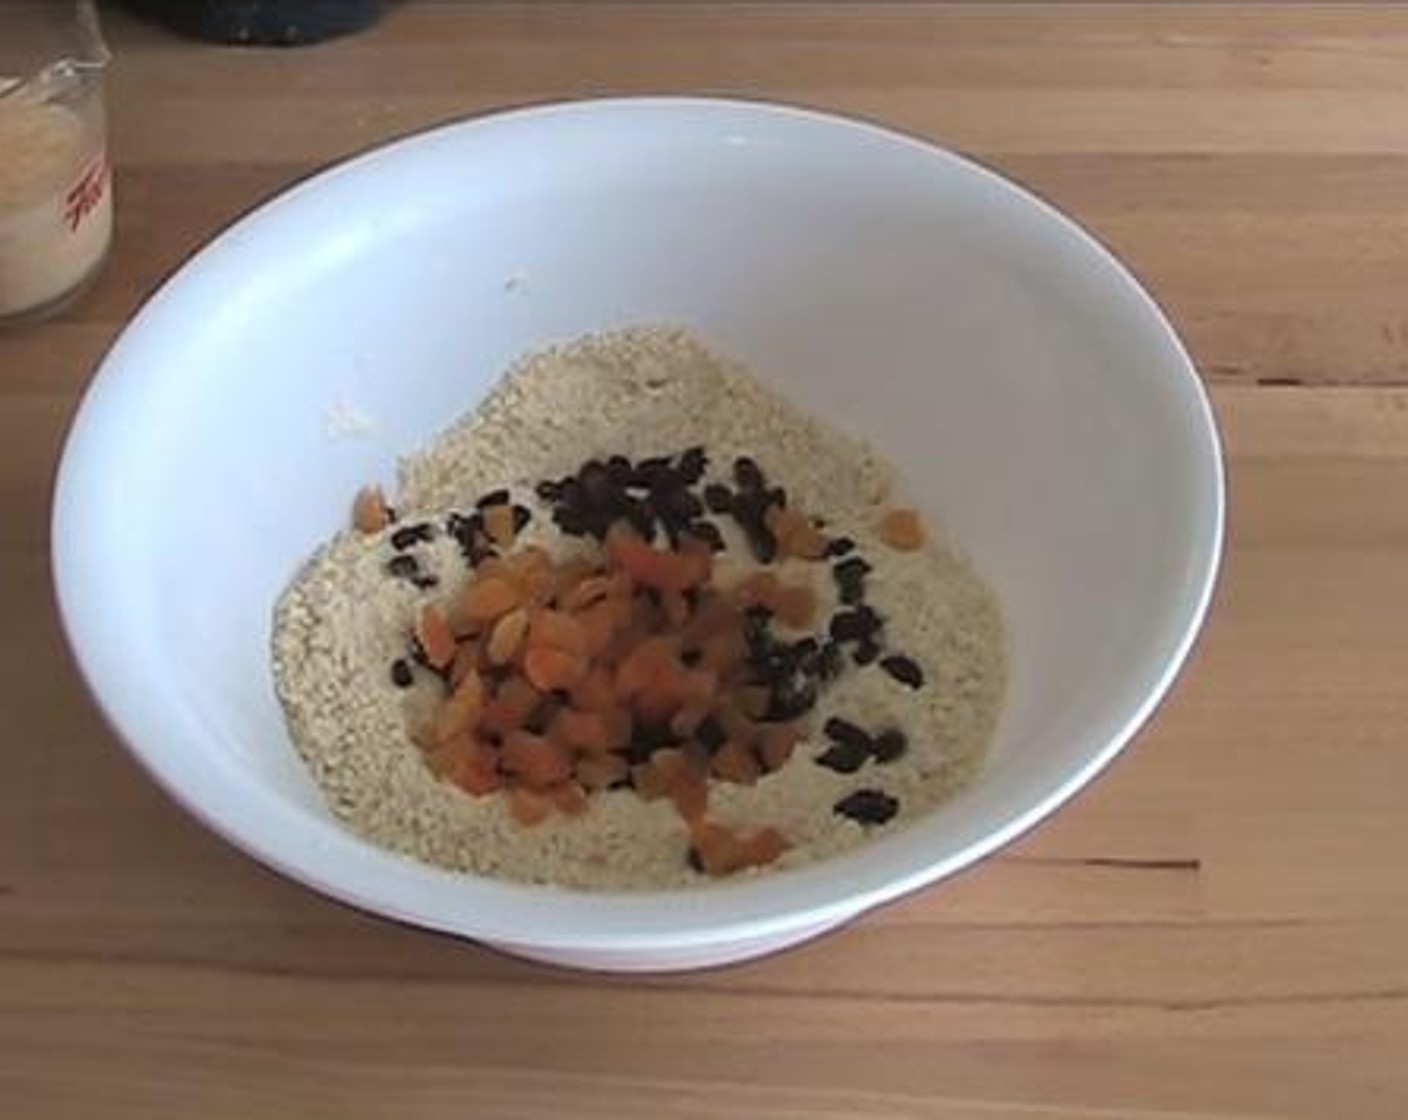 step 2 Into a mixing bowl, add and mix the Self-Rising Flour (2 cups), Ground Cinnamon (1/2 tsp), Caster Sugar (1/3 cup) and Butter (1/3 cup). Then add in the Sultanas (1/2 cup), and Dried Apricot (1/2 cup).